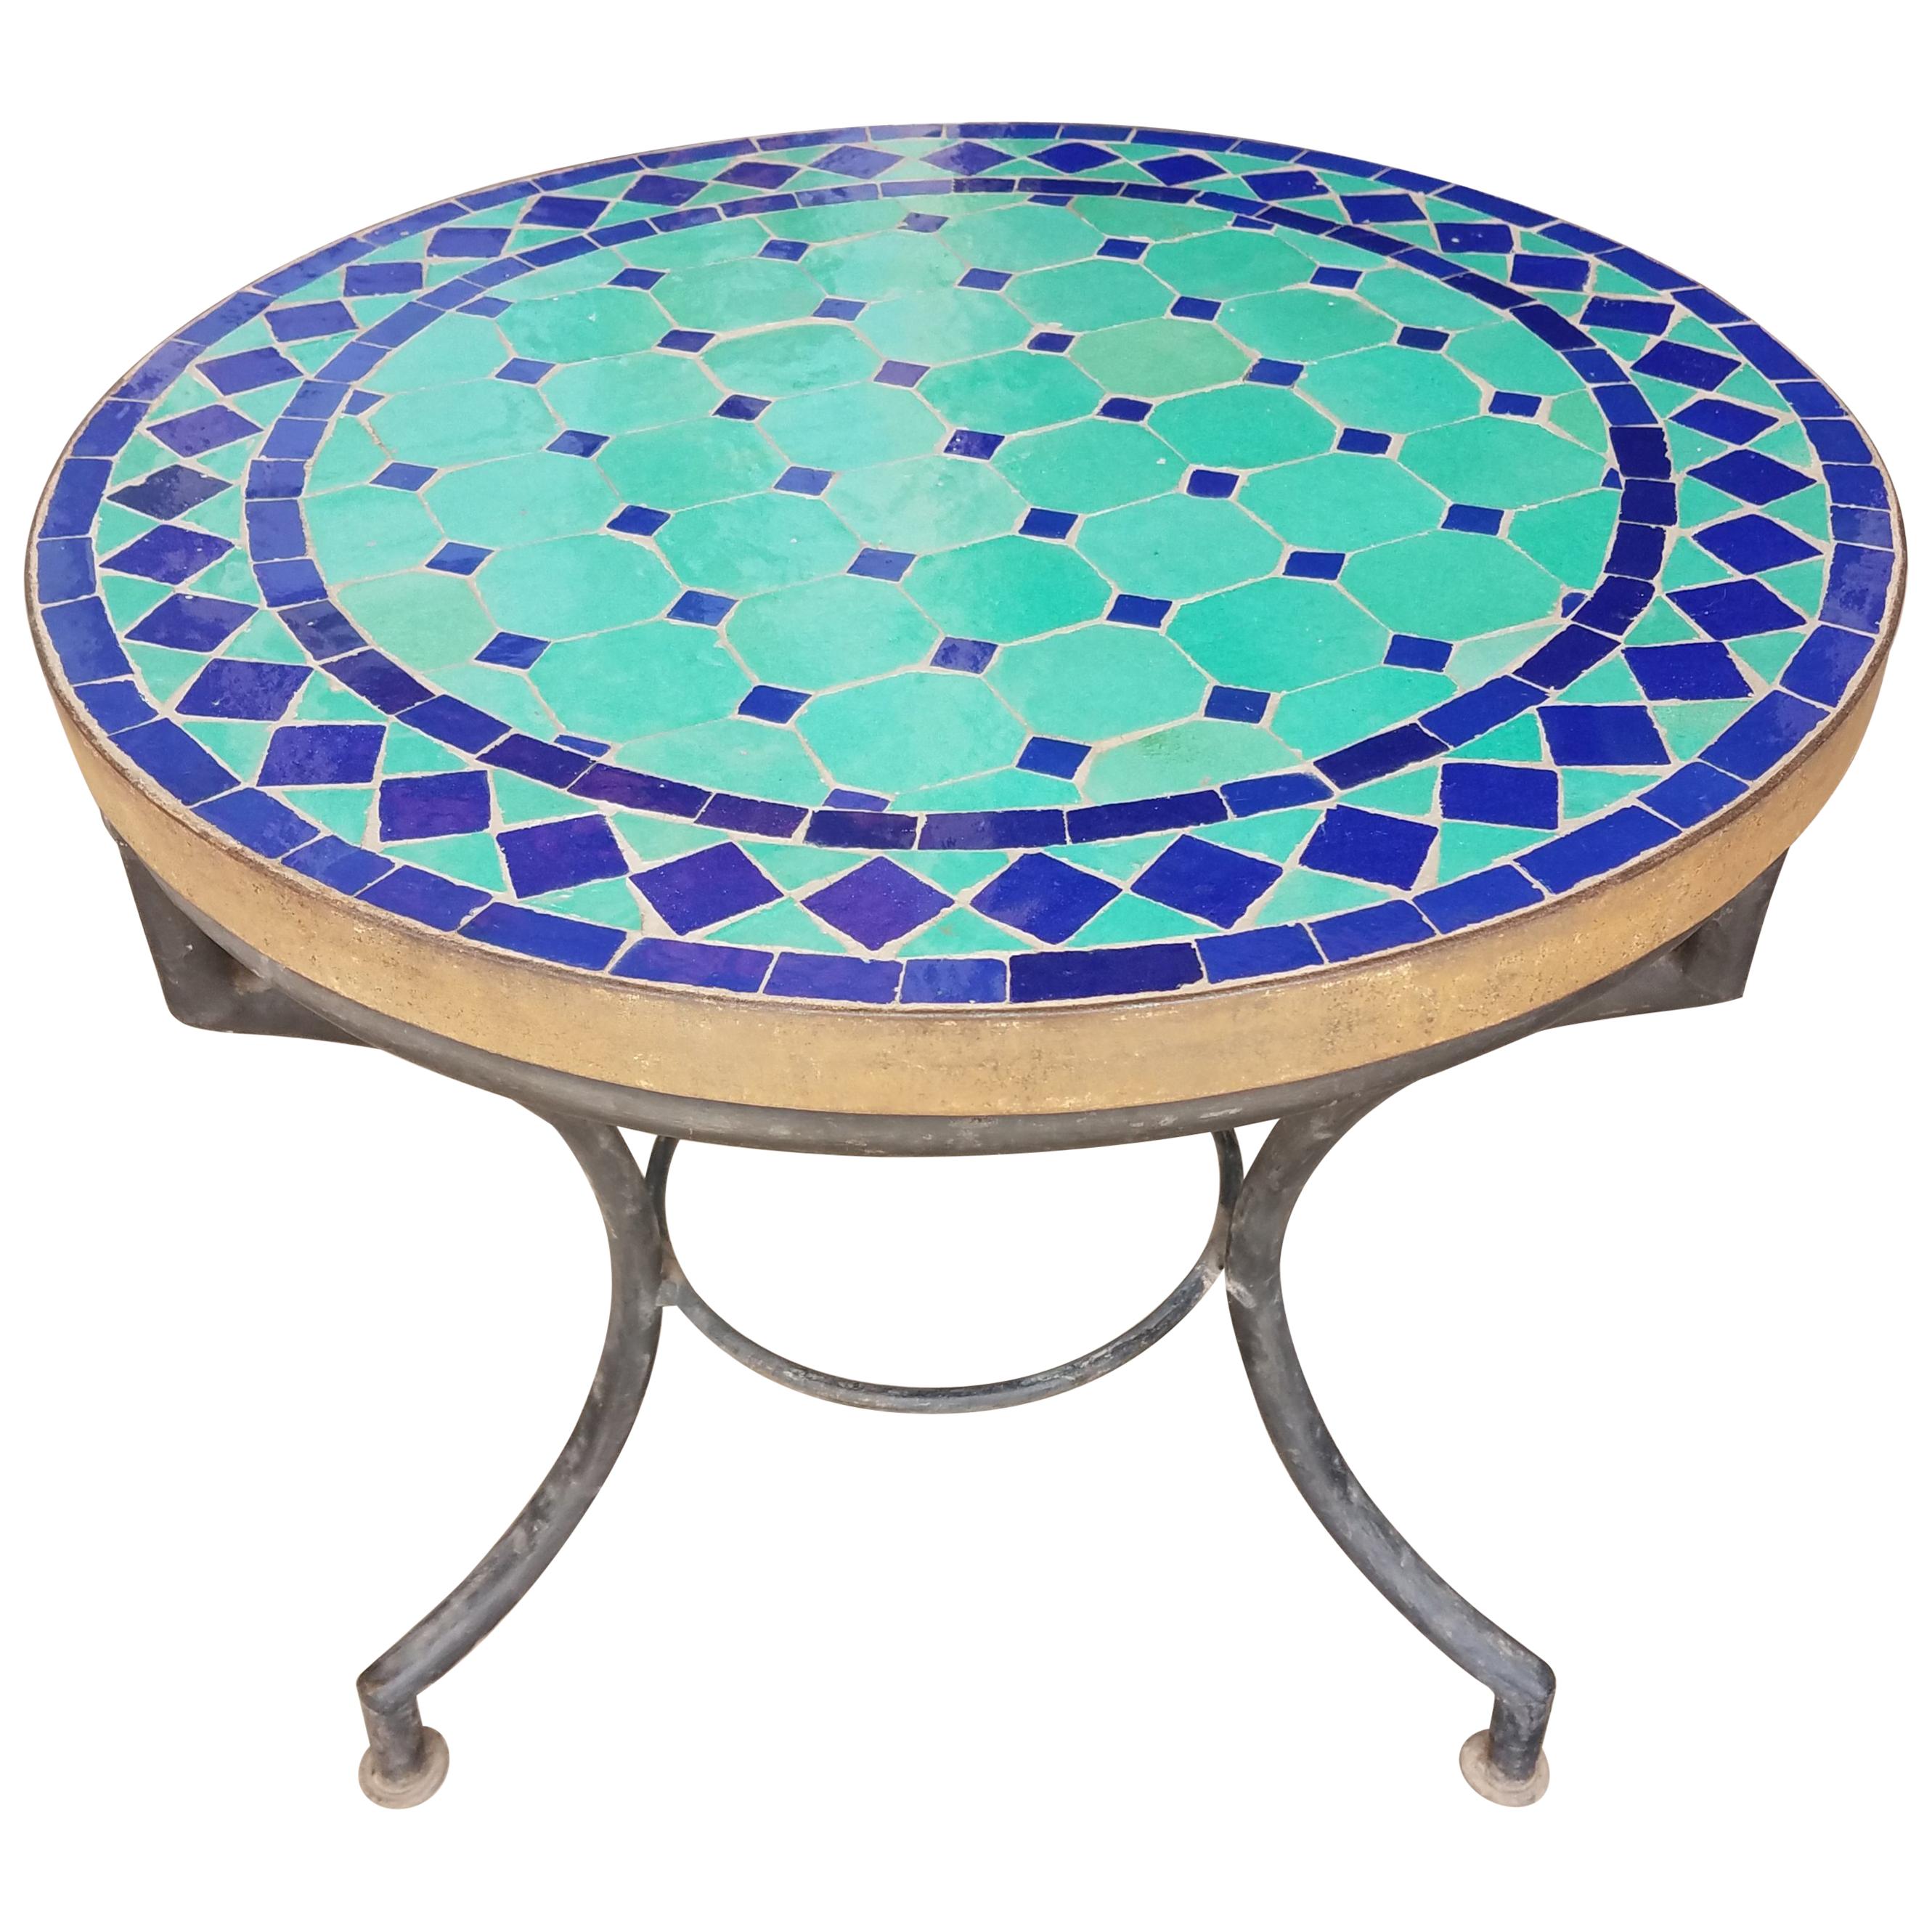 Blue And Turquoise Moroccan Mosaic Side Table = Mar 2 For Sale